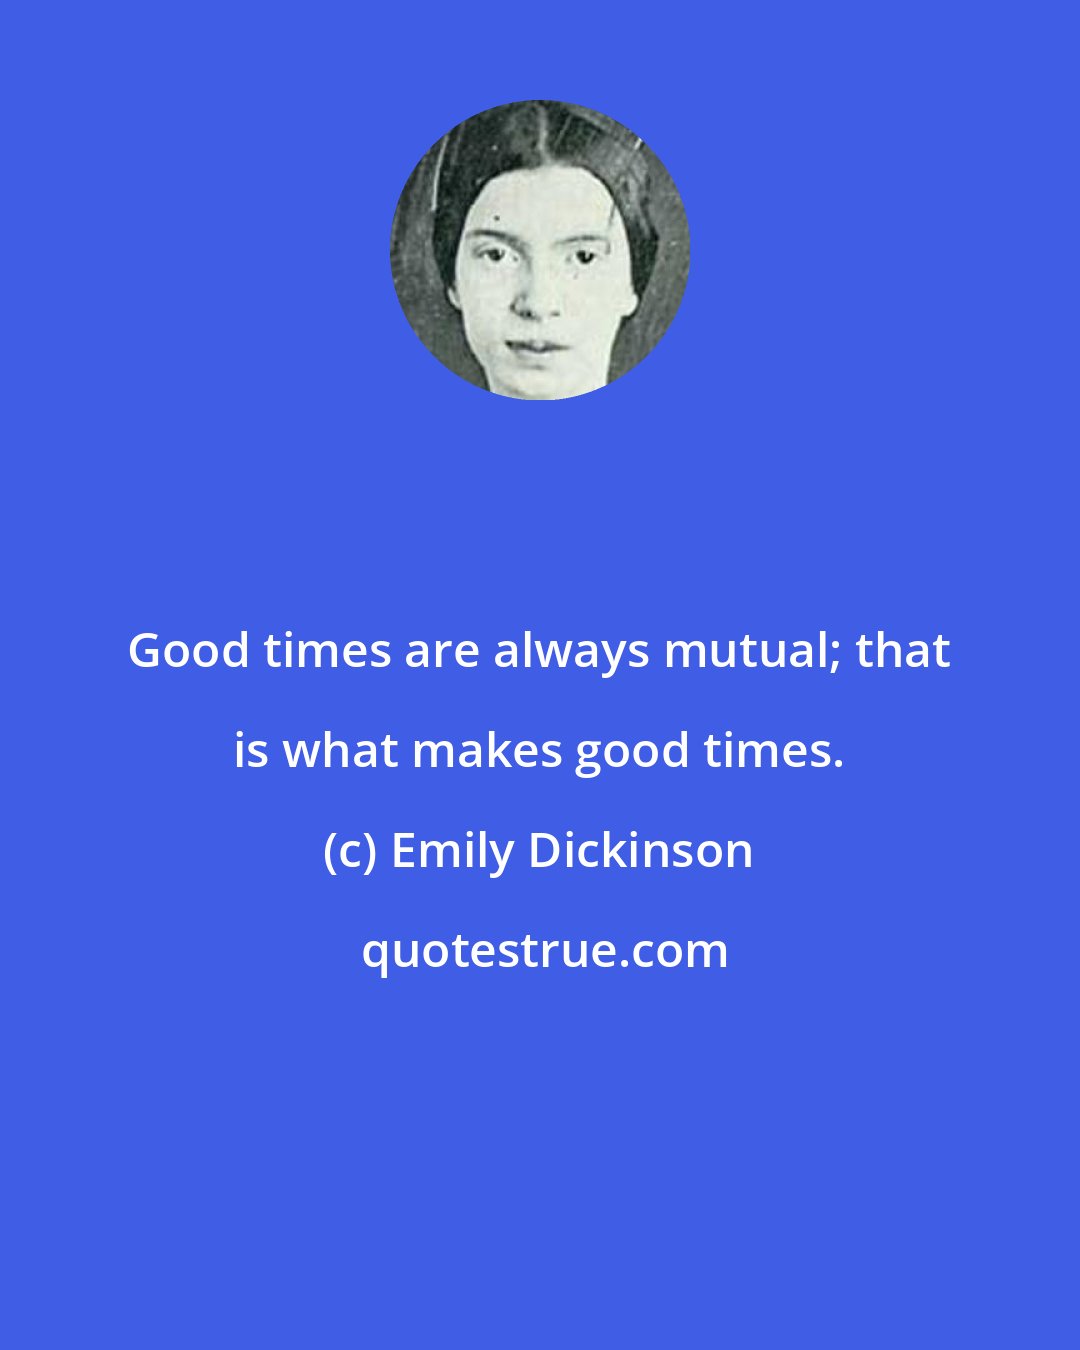 Emily Dickinson: Good times are always mutual; that is what makes good times.